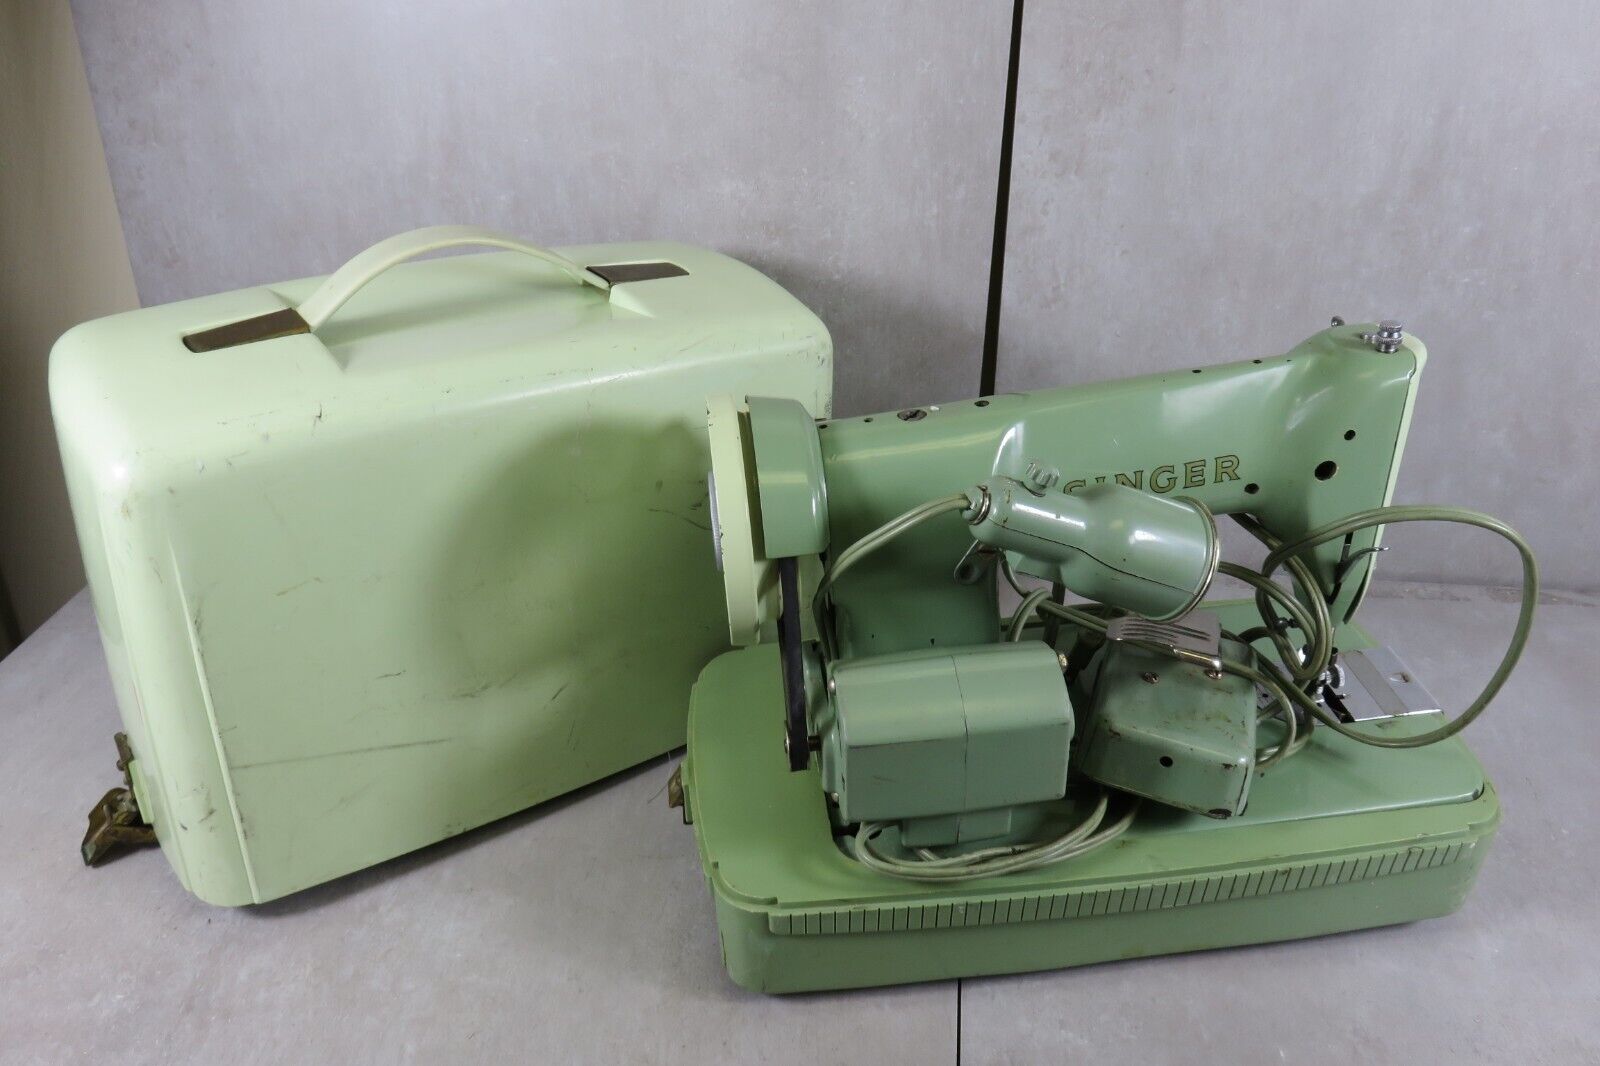 Vintage Singer Simanco Green Sewing Machine With Pedal and Case SEE PHOTOS